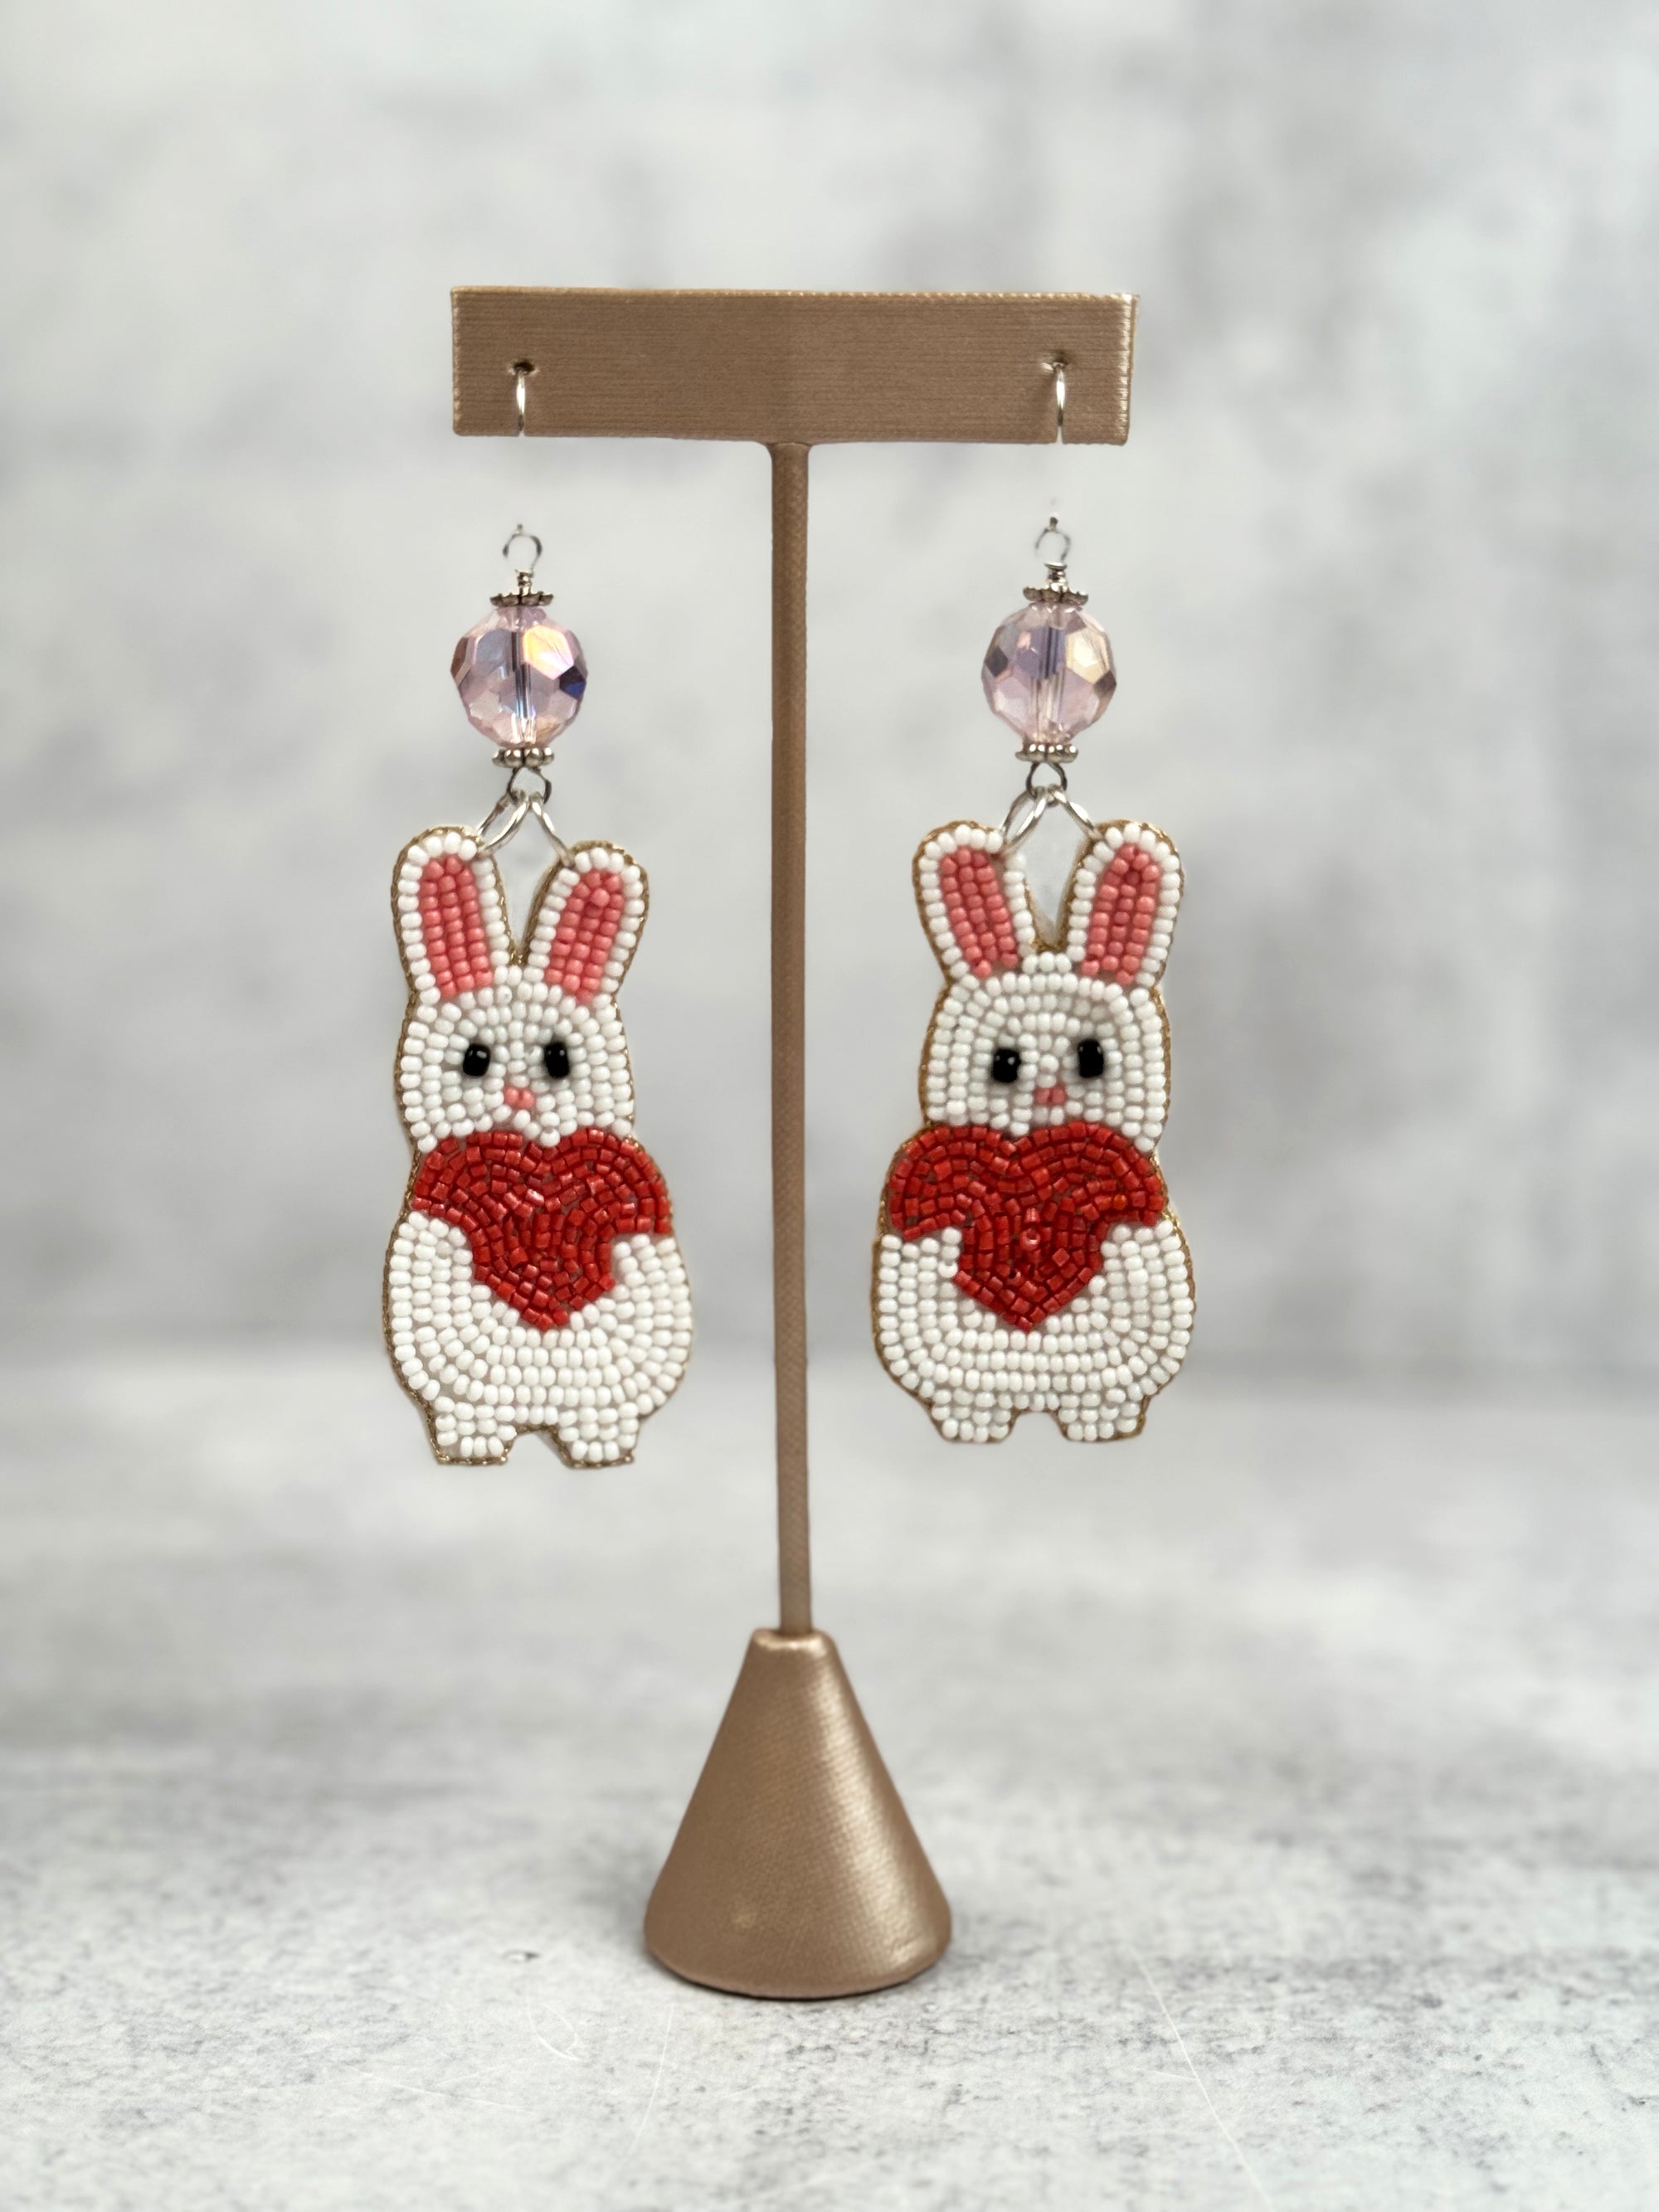 Bunnies and Hearts Earrings